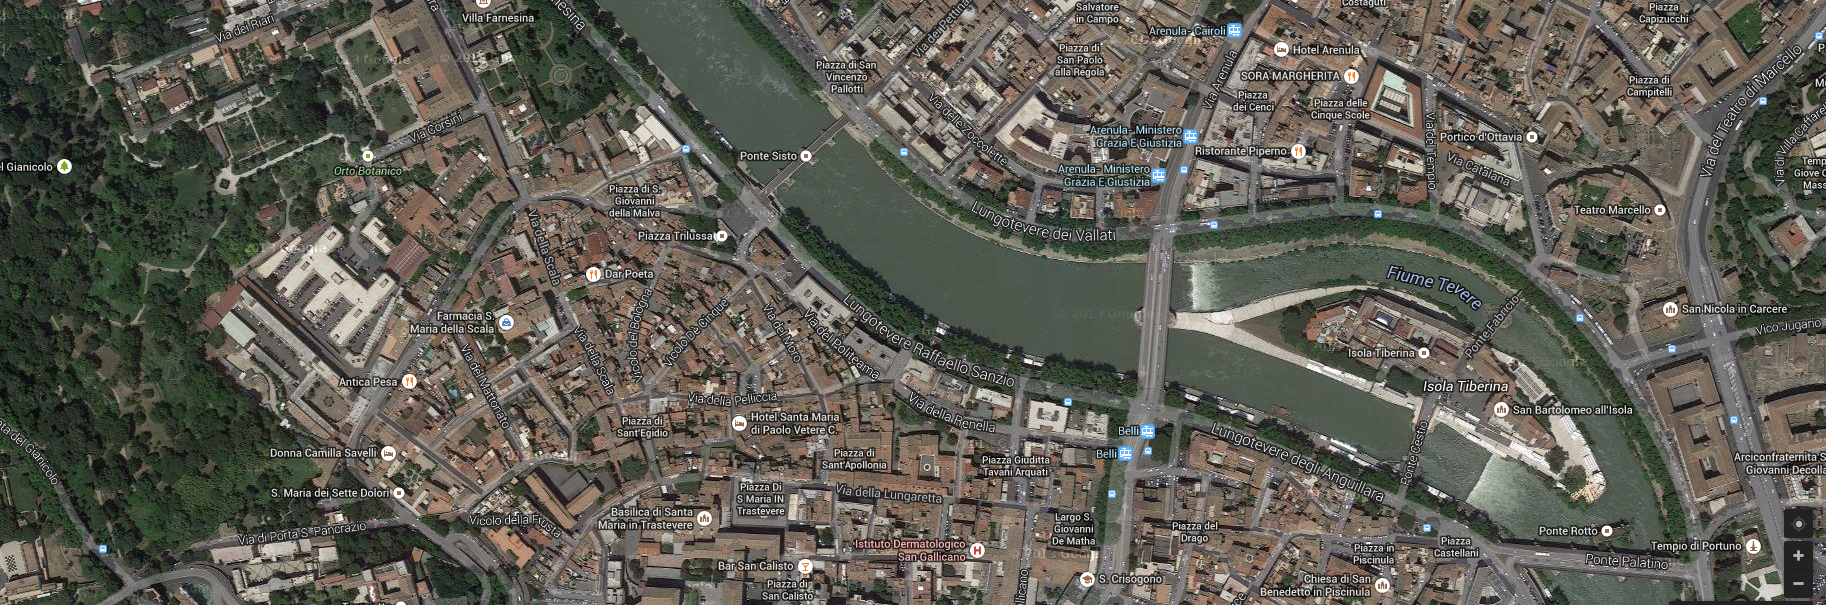 Satellite view of Trastevere's northern section.